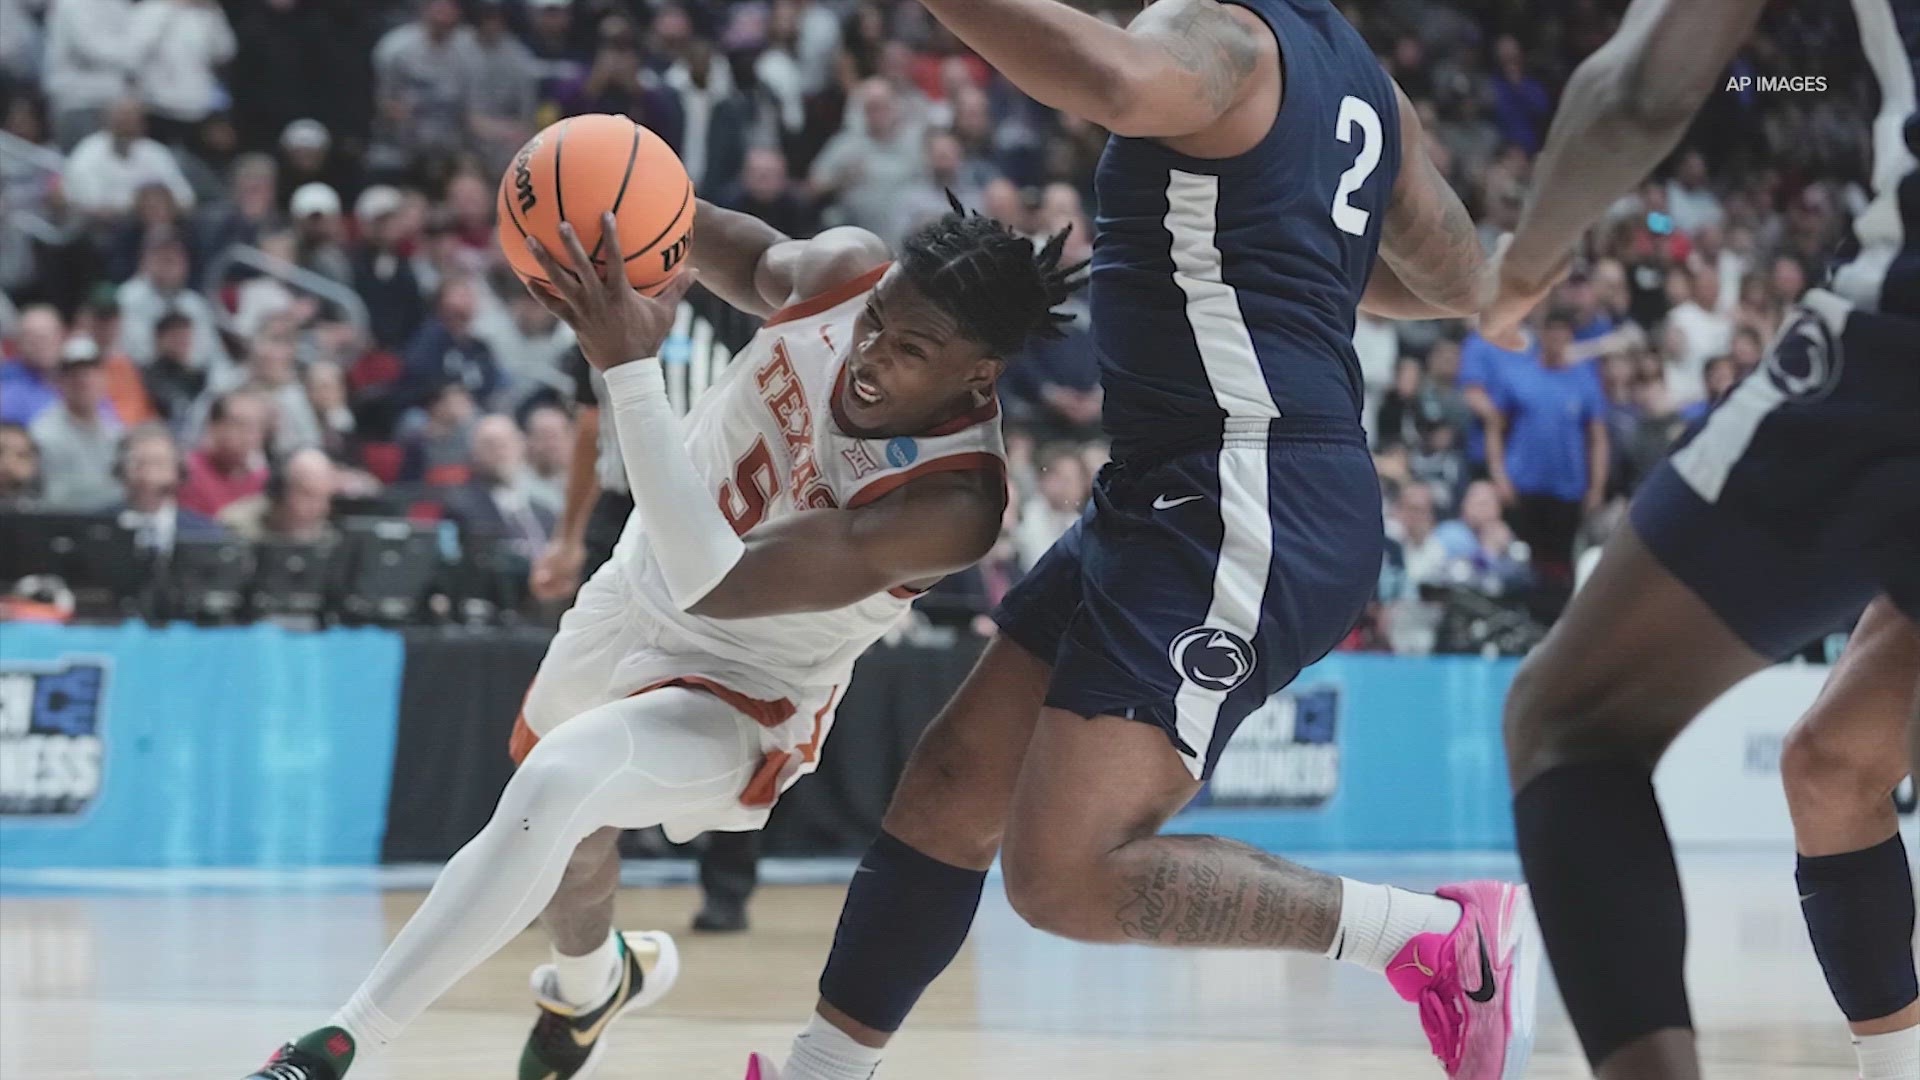 The Longhorns held off Penn State to advance in the NCAA Tournament.